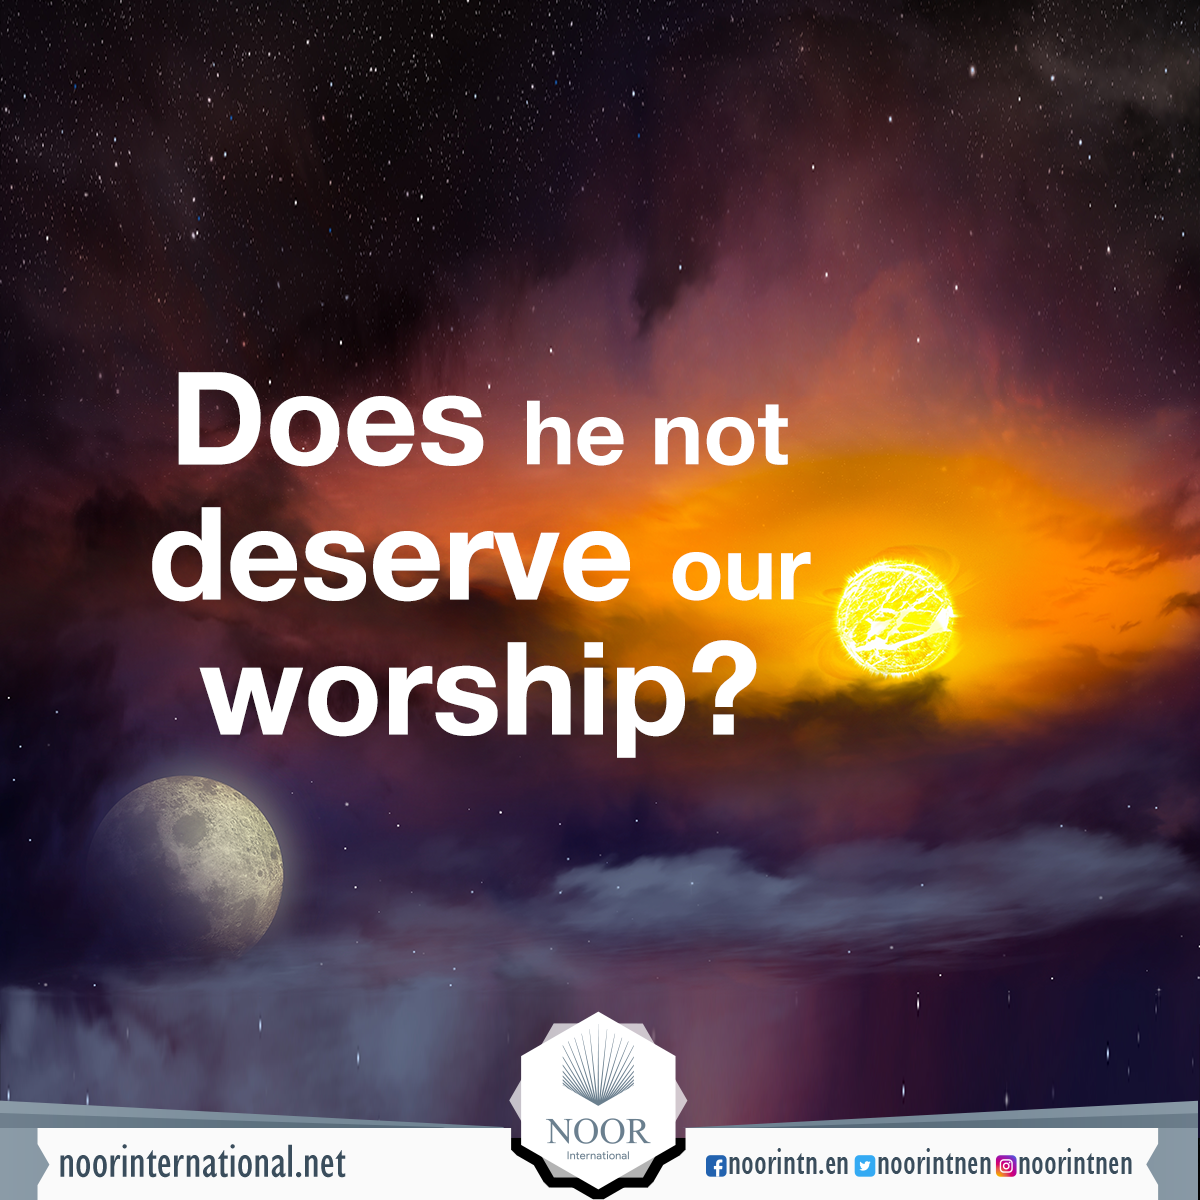 Does he not deserve our worship?